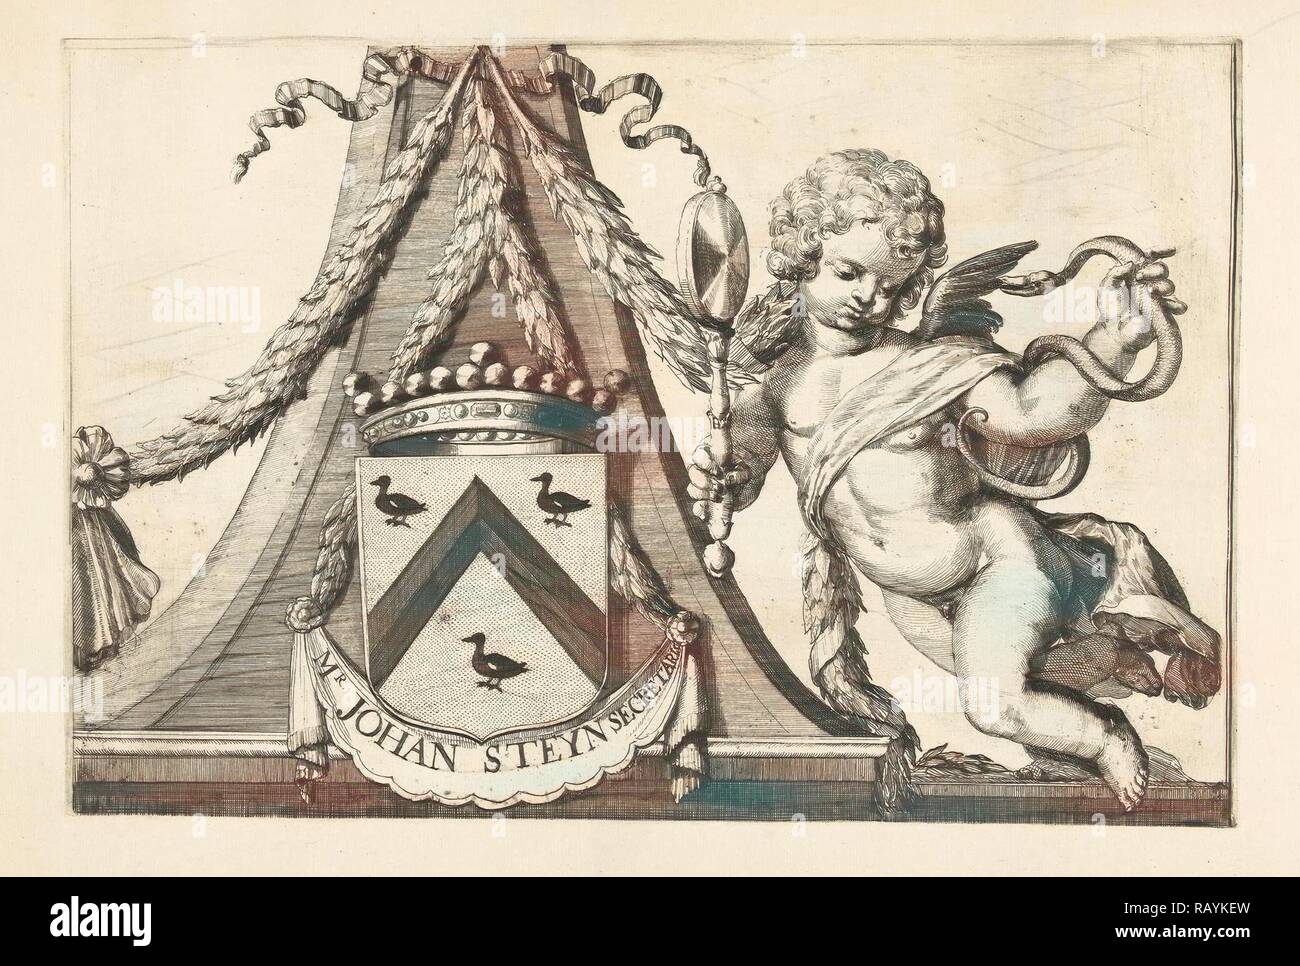 Coat of arms of Jacob Steyn, Romeyn de Hooghe, 1688-1689. Reimagined by Gibon. Classic art with a modern twist reimagined Stock Photo